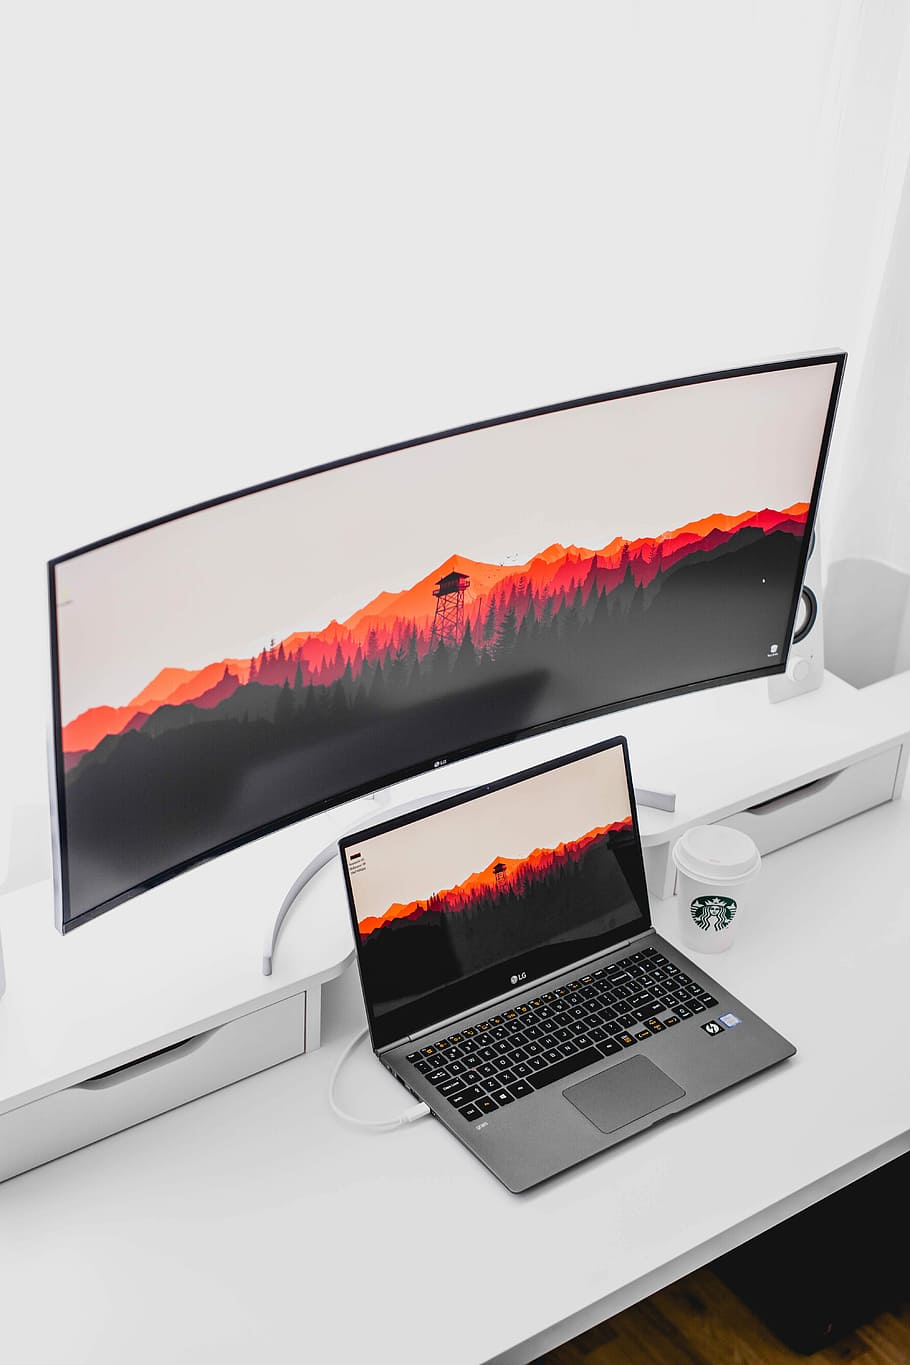 laptop computer beside curved monitor, curved monitor, laptop computer, and Starbucks cup on white wooden table